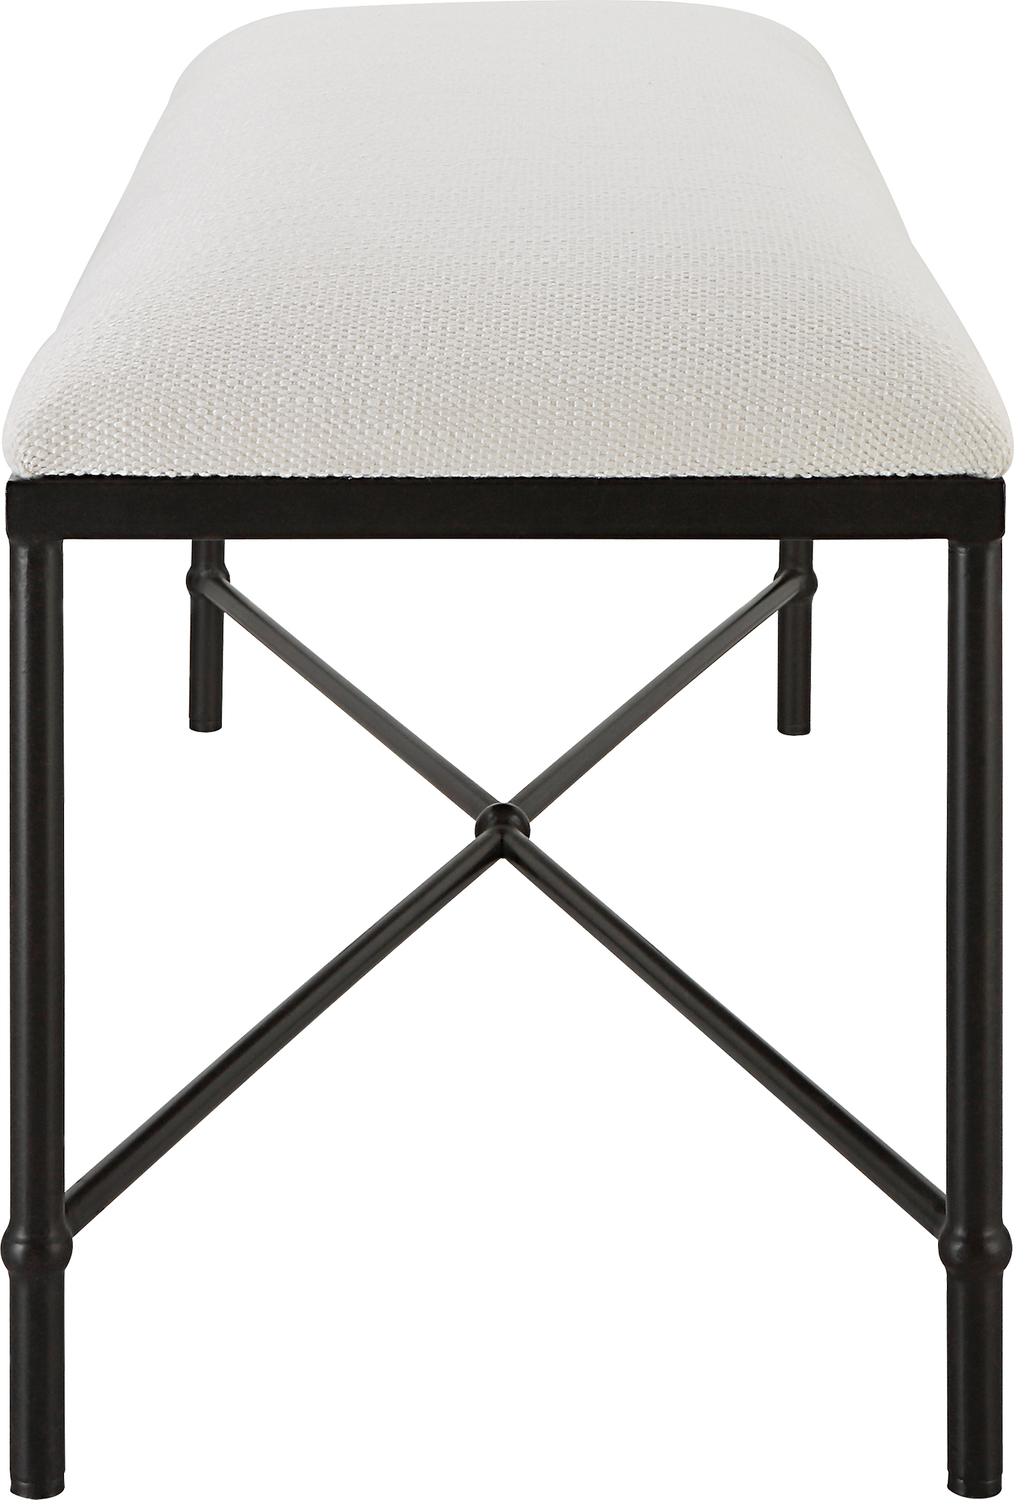 black upholstered storage ottoman Uttermost Benches Thoroughly Modern Yet Inspired By The Classics, This Bench Displays A Stylish Black And White Look Featuring An Iron Frame In Aged Black, Upholstered In A Crisp White Textured Fabric.